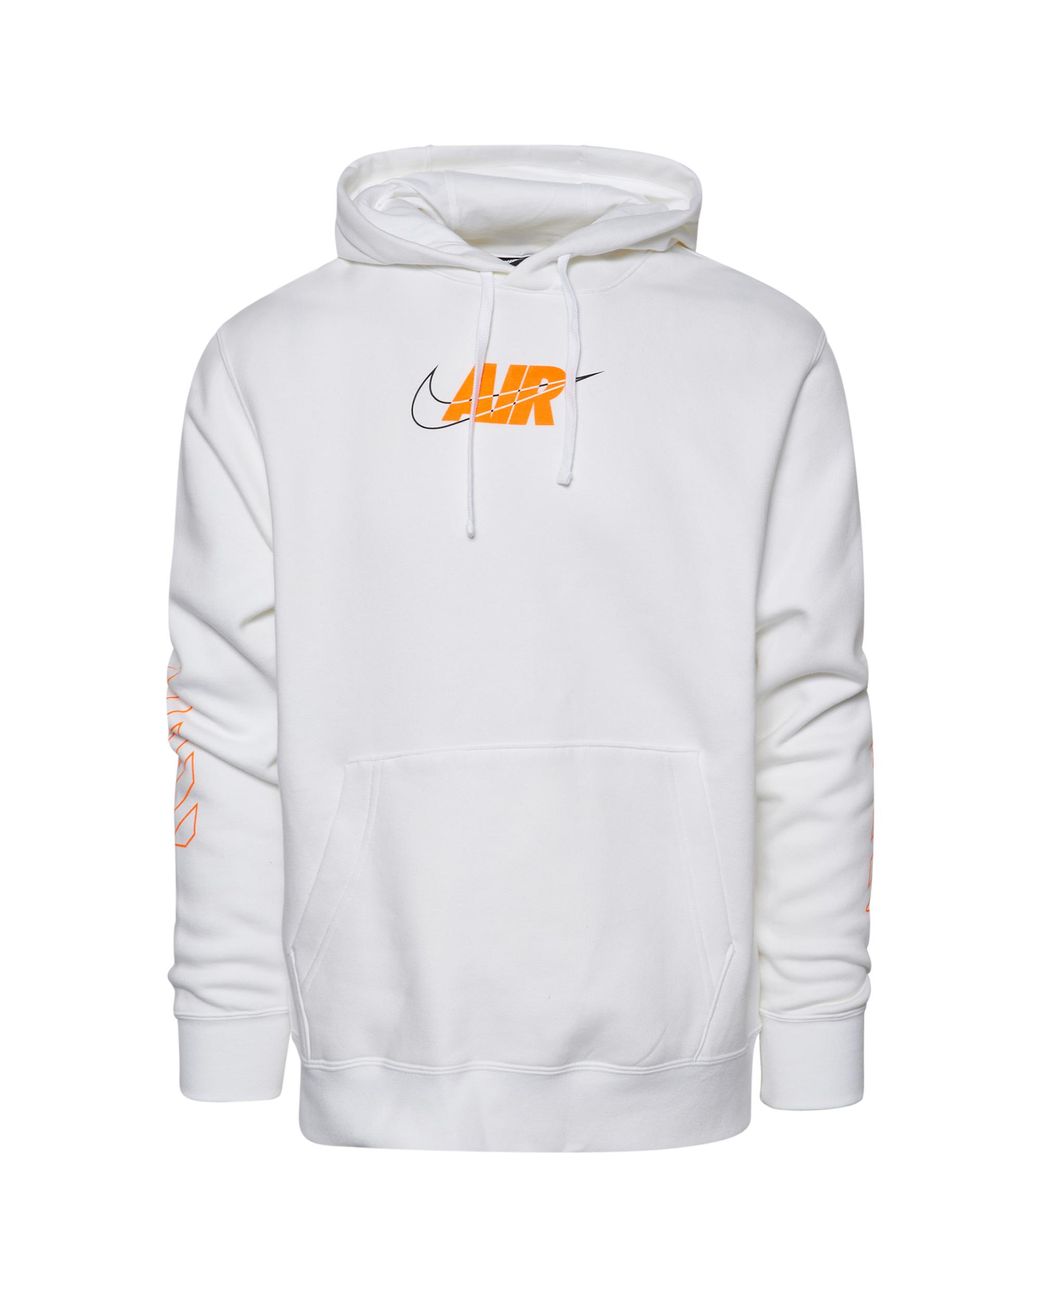 Nike Cotton Air Box Cf Pullover Hoodie in White/White (White) for Men ...